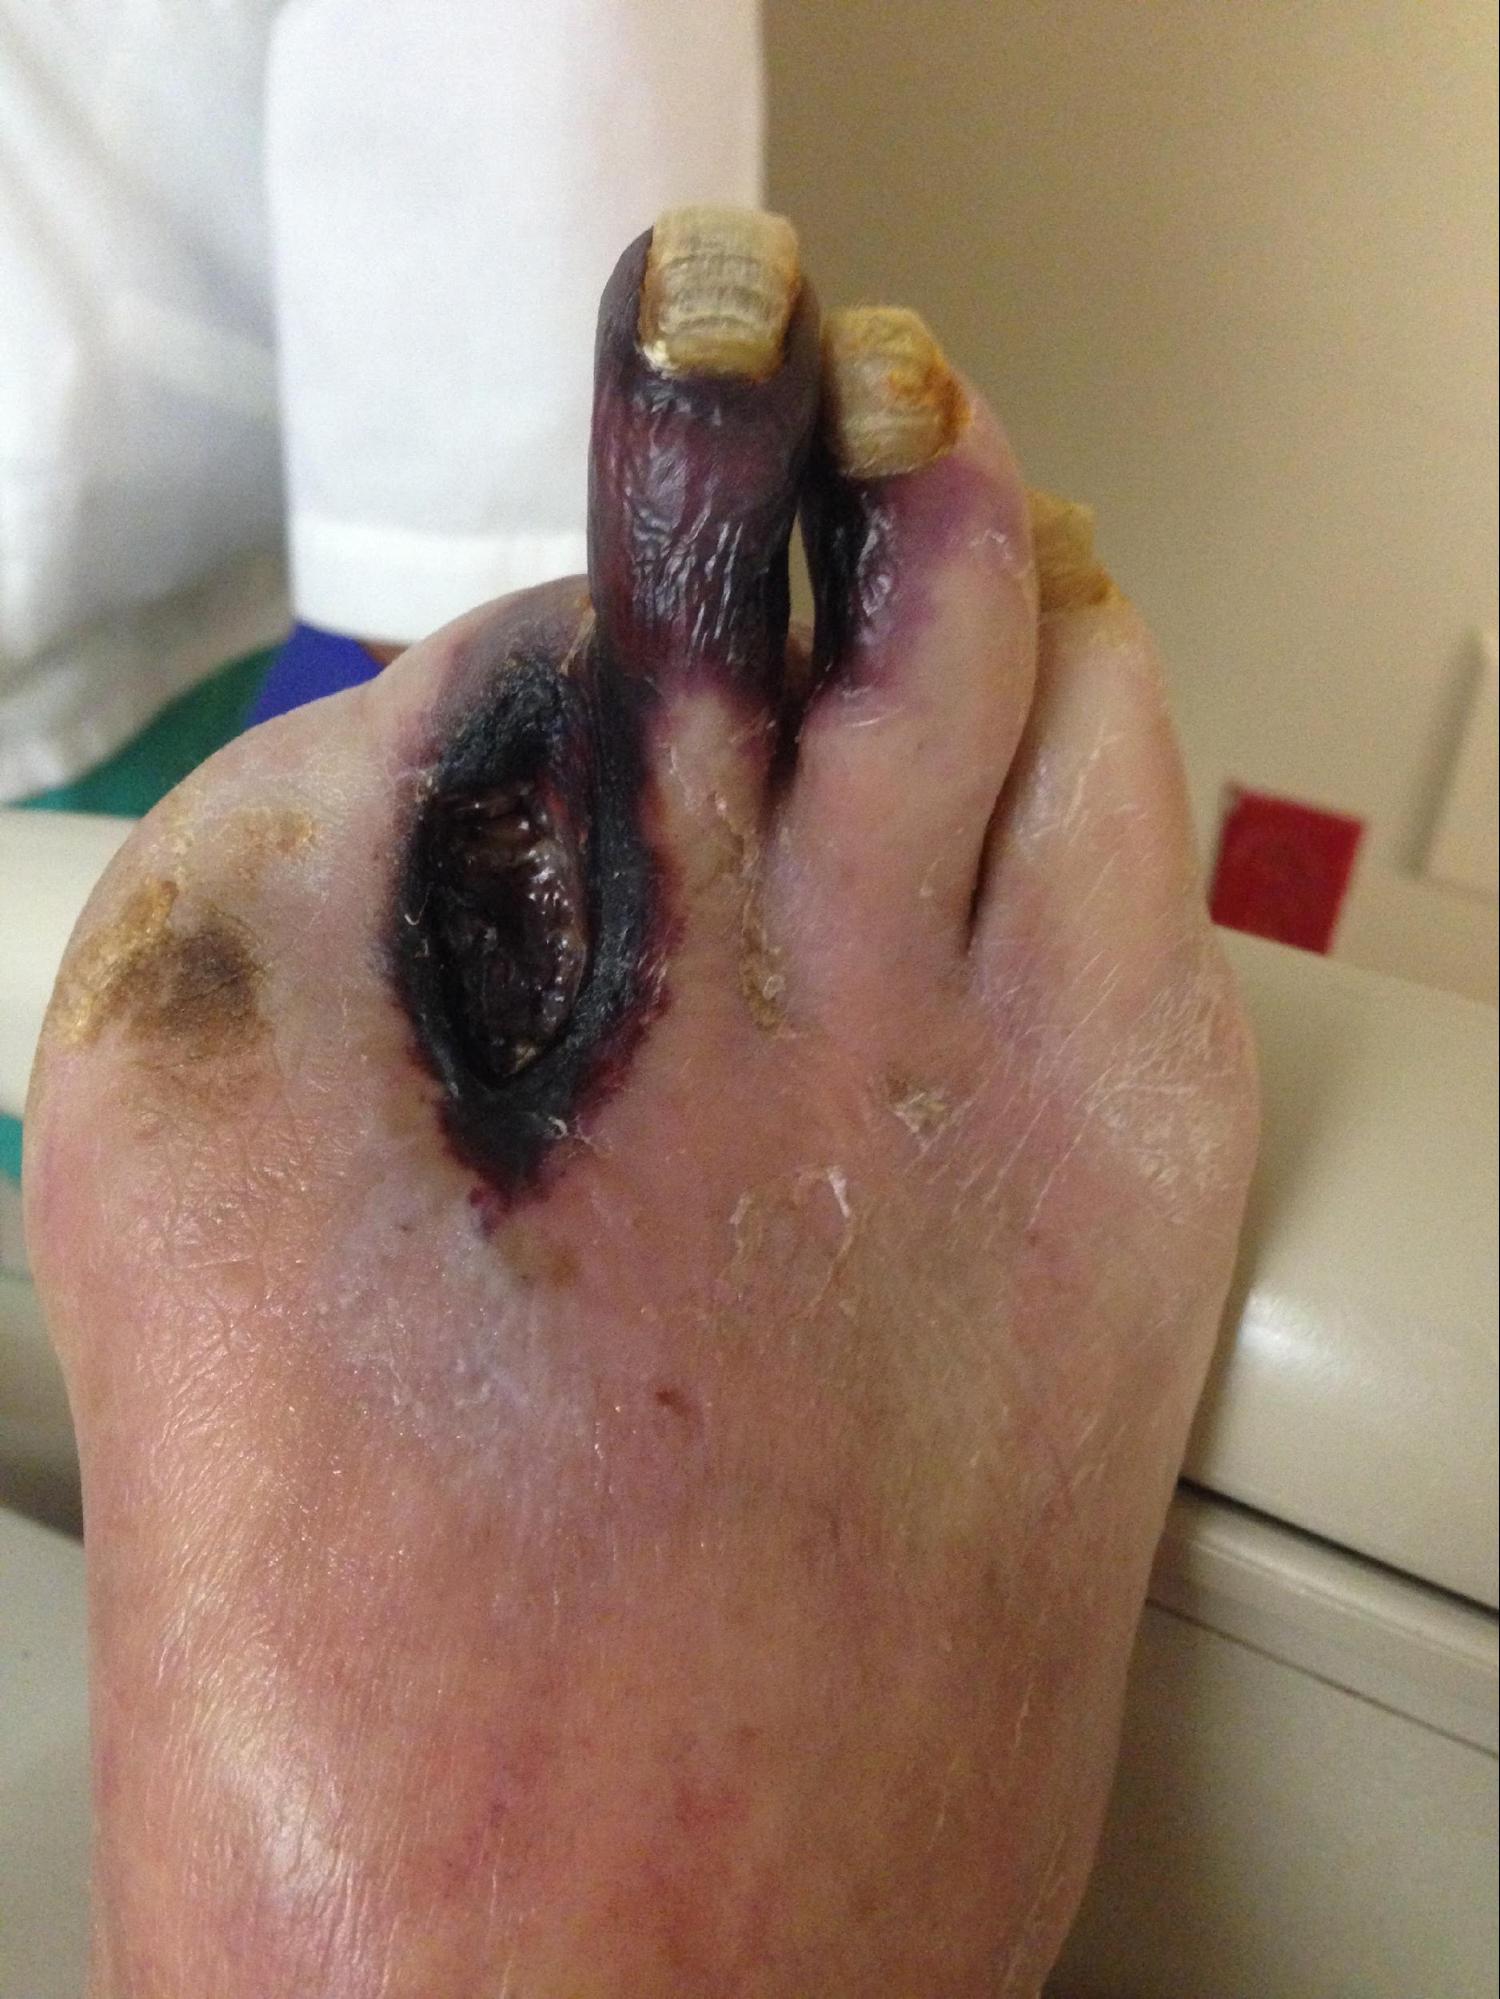 Peripheral Arterial Disease
Non-healing necrotic ulceration and gangrene of the 3rd digit secondary to PAD. 